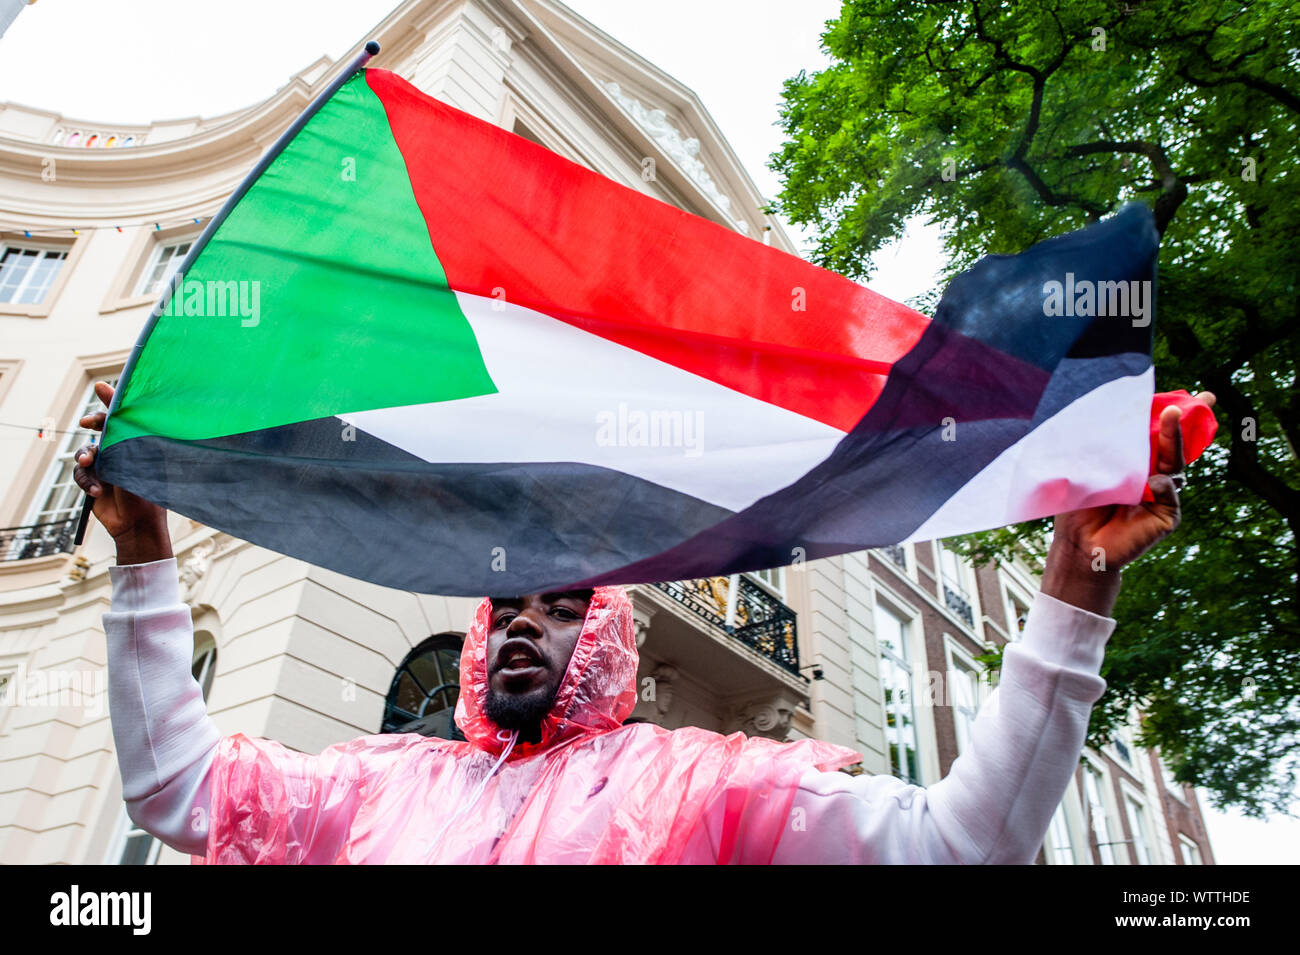 A Sudanese protester holds a Sudanese flag during the demonstration.From September 6th to 11th, an international Sudanese march took place starting in London and ending in The Hague after stopping in France and Belgium. On September 11th, the march arrived in front of the International Criminal Court building, situated in The Hague. The march was held in solidarity with the Sudanese revolution and calls for the prosecution of military criminals in Sudan. The march was organized by the Sudanese Initiative Europe. Stock Photo